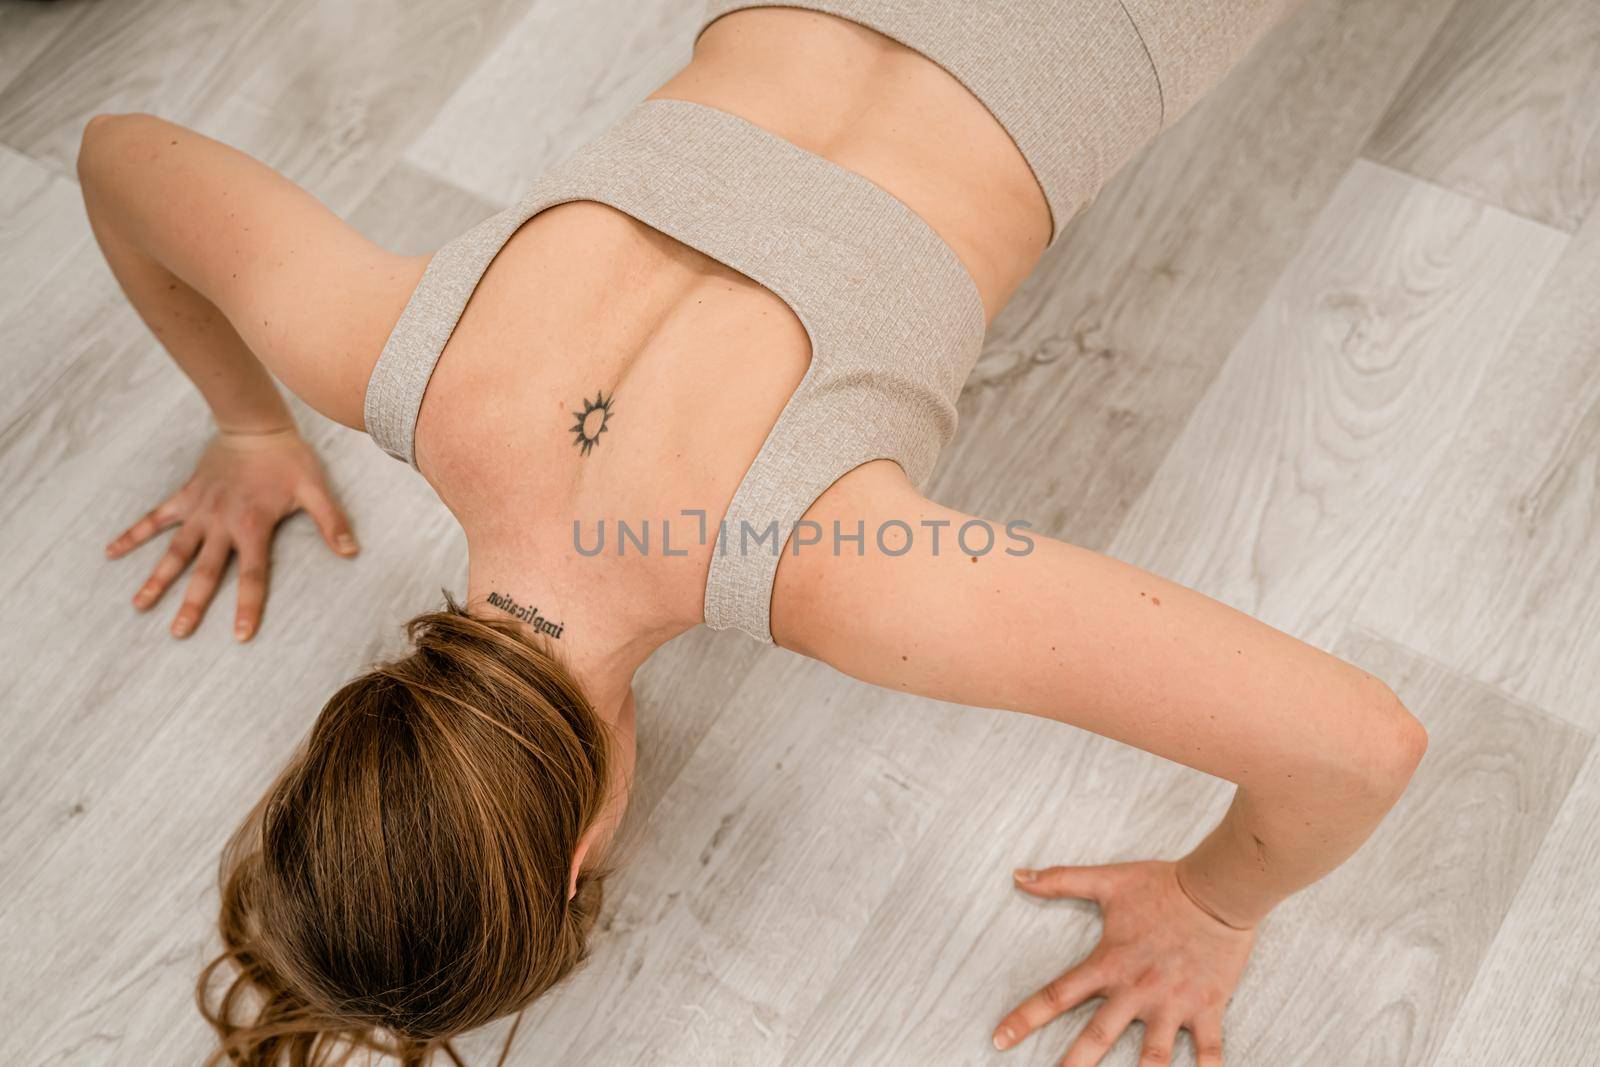 Top view of a muscular woman during push-ups. She is wearing a beige top and leggings, with a round tattoo between her shoulder blades. The concept of a healthy lifestyle. by Matiunina